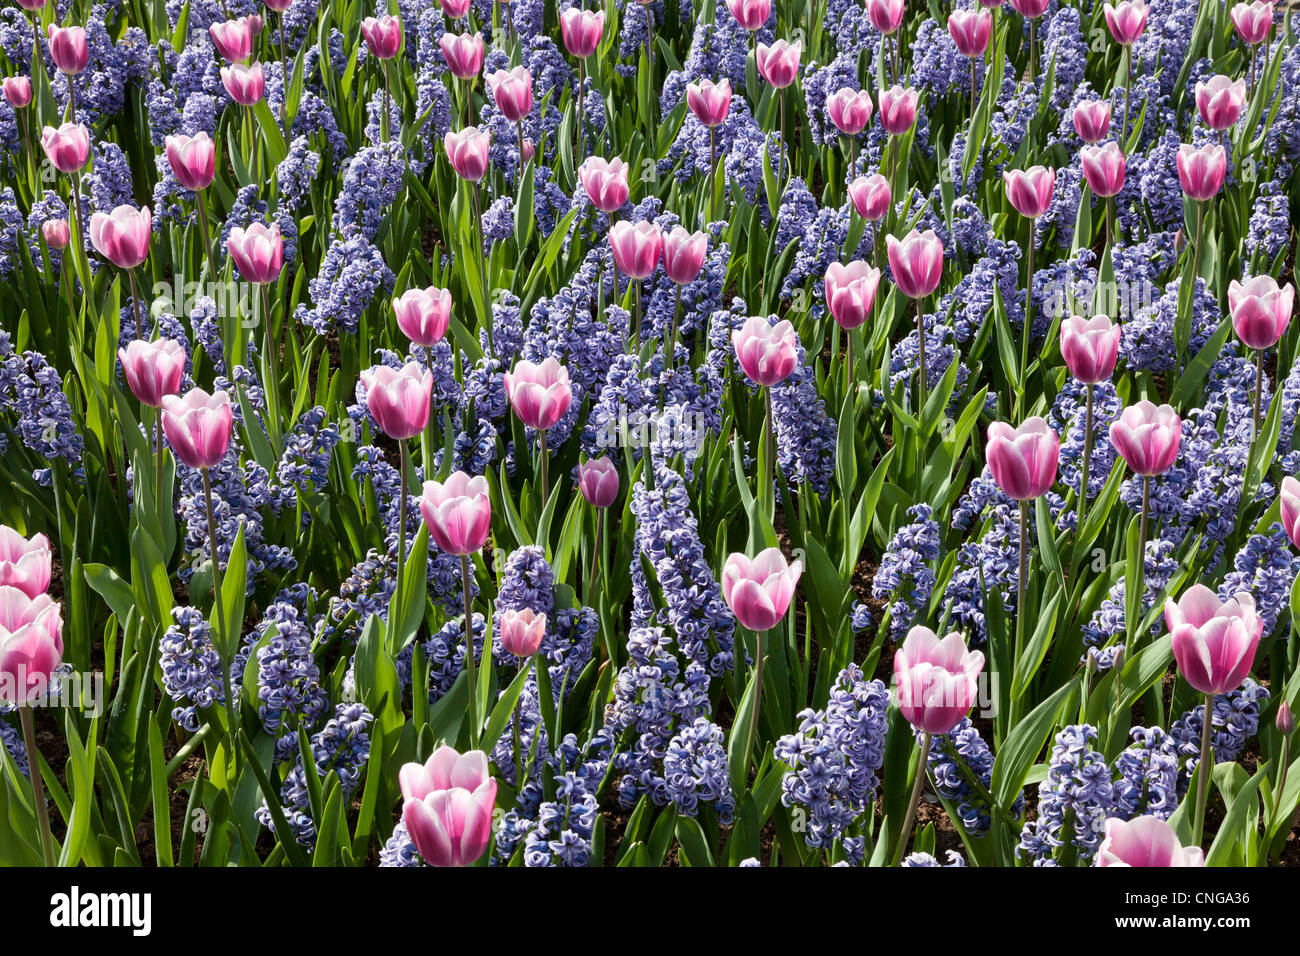 Flowerber with tulips 'Synaeda Blue' and Hyacinths 'Skyline' (Tulipa Triomphe 'Synaeda Blue', Hyacinthus 'Skyline') Stock Photo